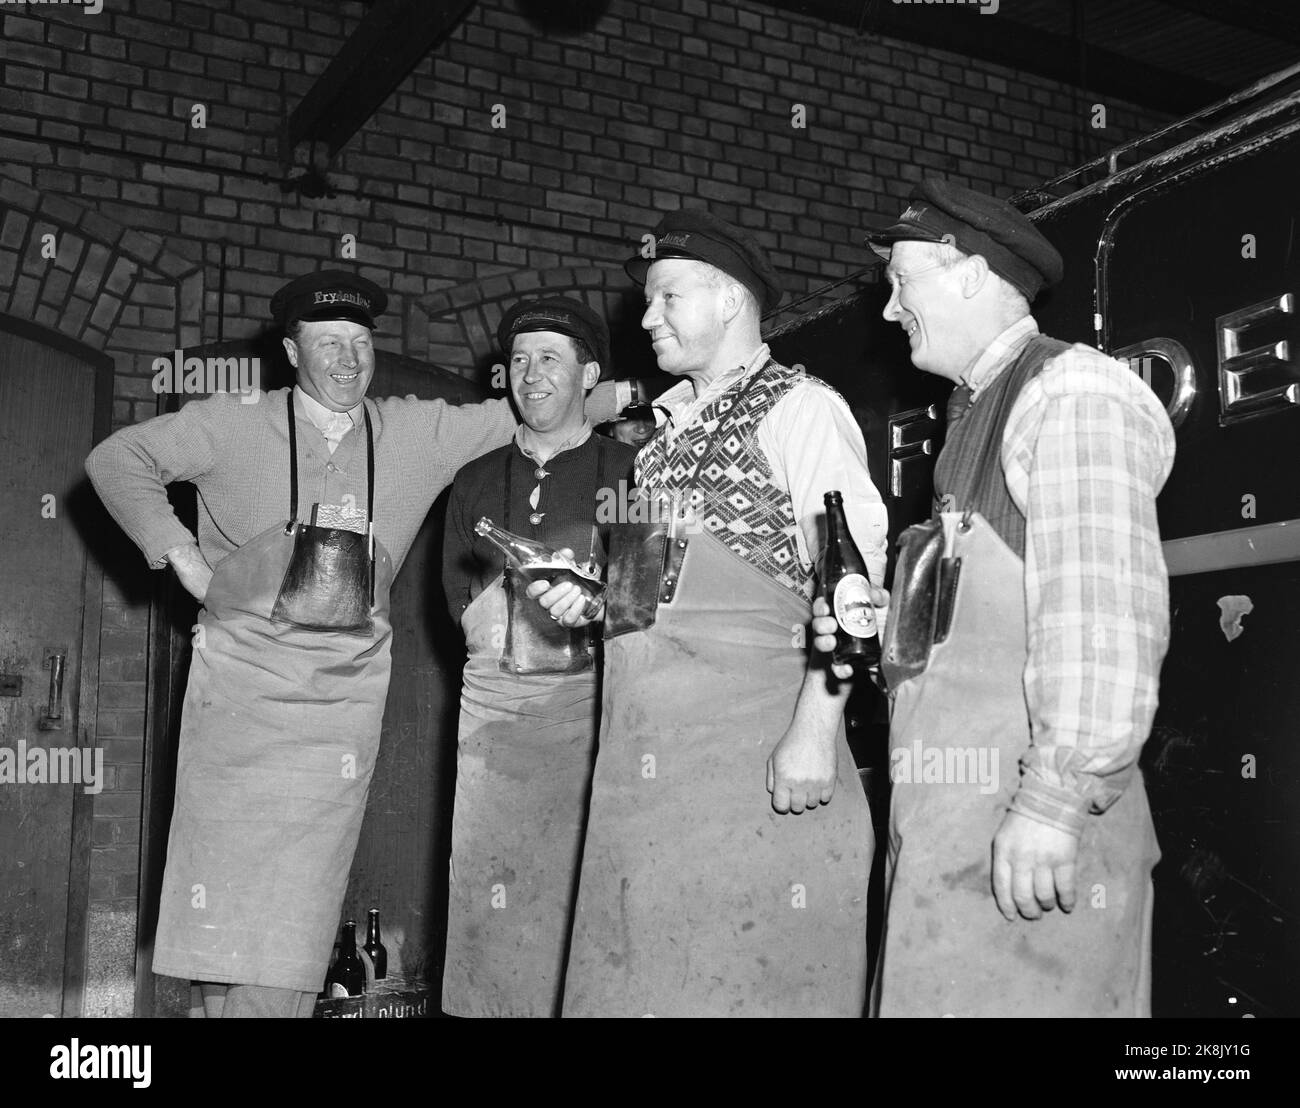 Oslo 1951. Breweries in Oslo in 1951. Here are some of the drivers who strengthen with a beer before delivering beer to shops and restaurants in the Oslo area. Photo: Sverre A. Børretzen / Current / NTB  Breweries in oslo in 1951. Pictured are some of the drivers enjoying a beer before starting their delivery rounds to shops and restaurants in the oslo area. Photo: Sverre A. Børretzen/ Current/ NTB Stock Photo